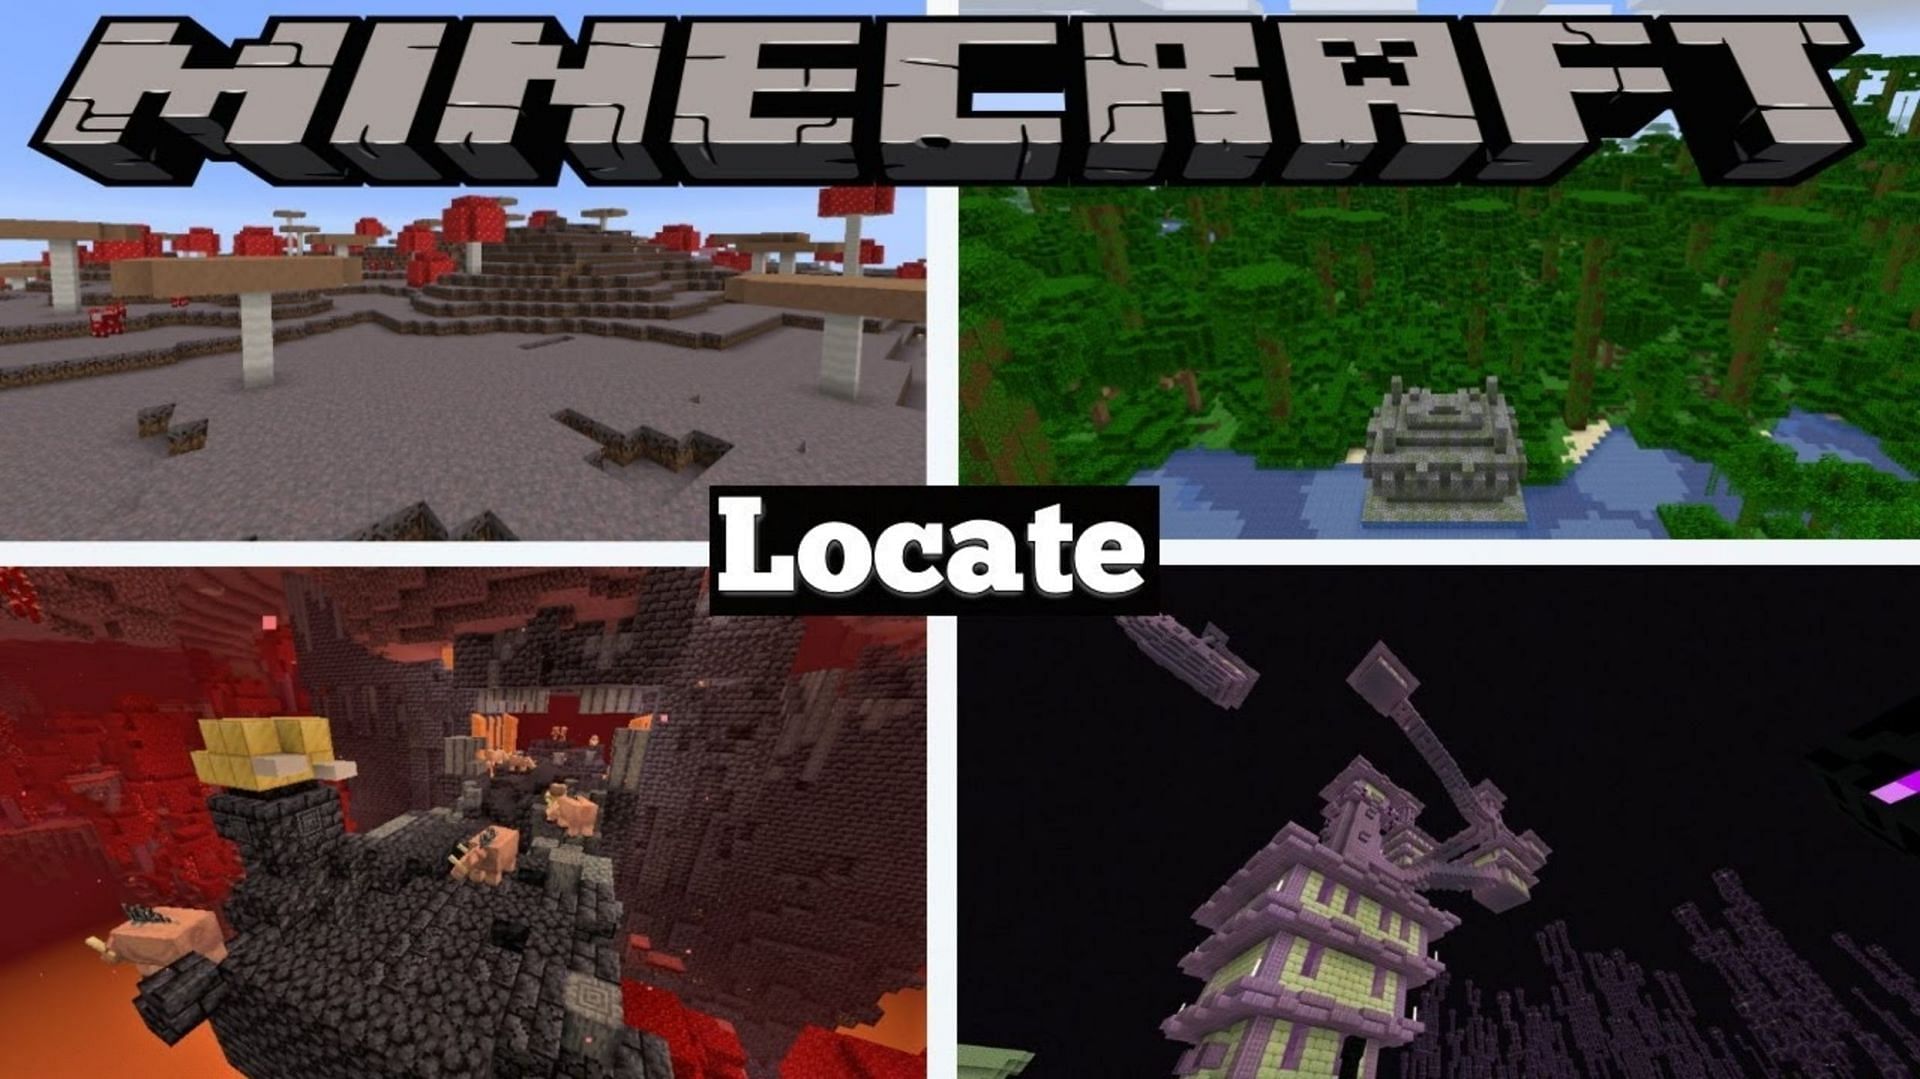 The locate commands can allow players to find structures or biomes (Image via UltraUnit17/Youtube)